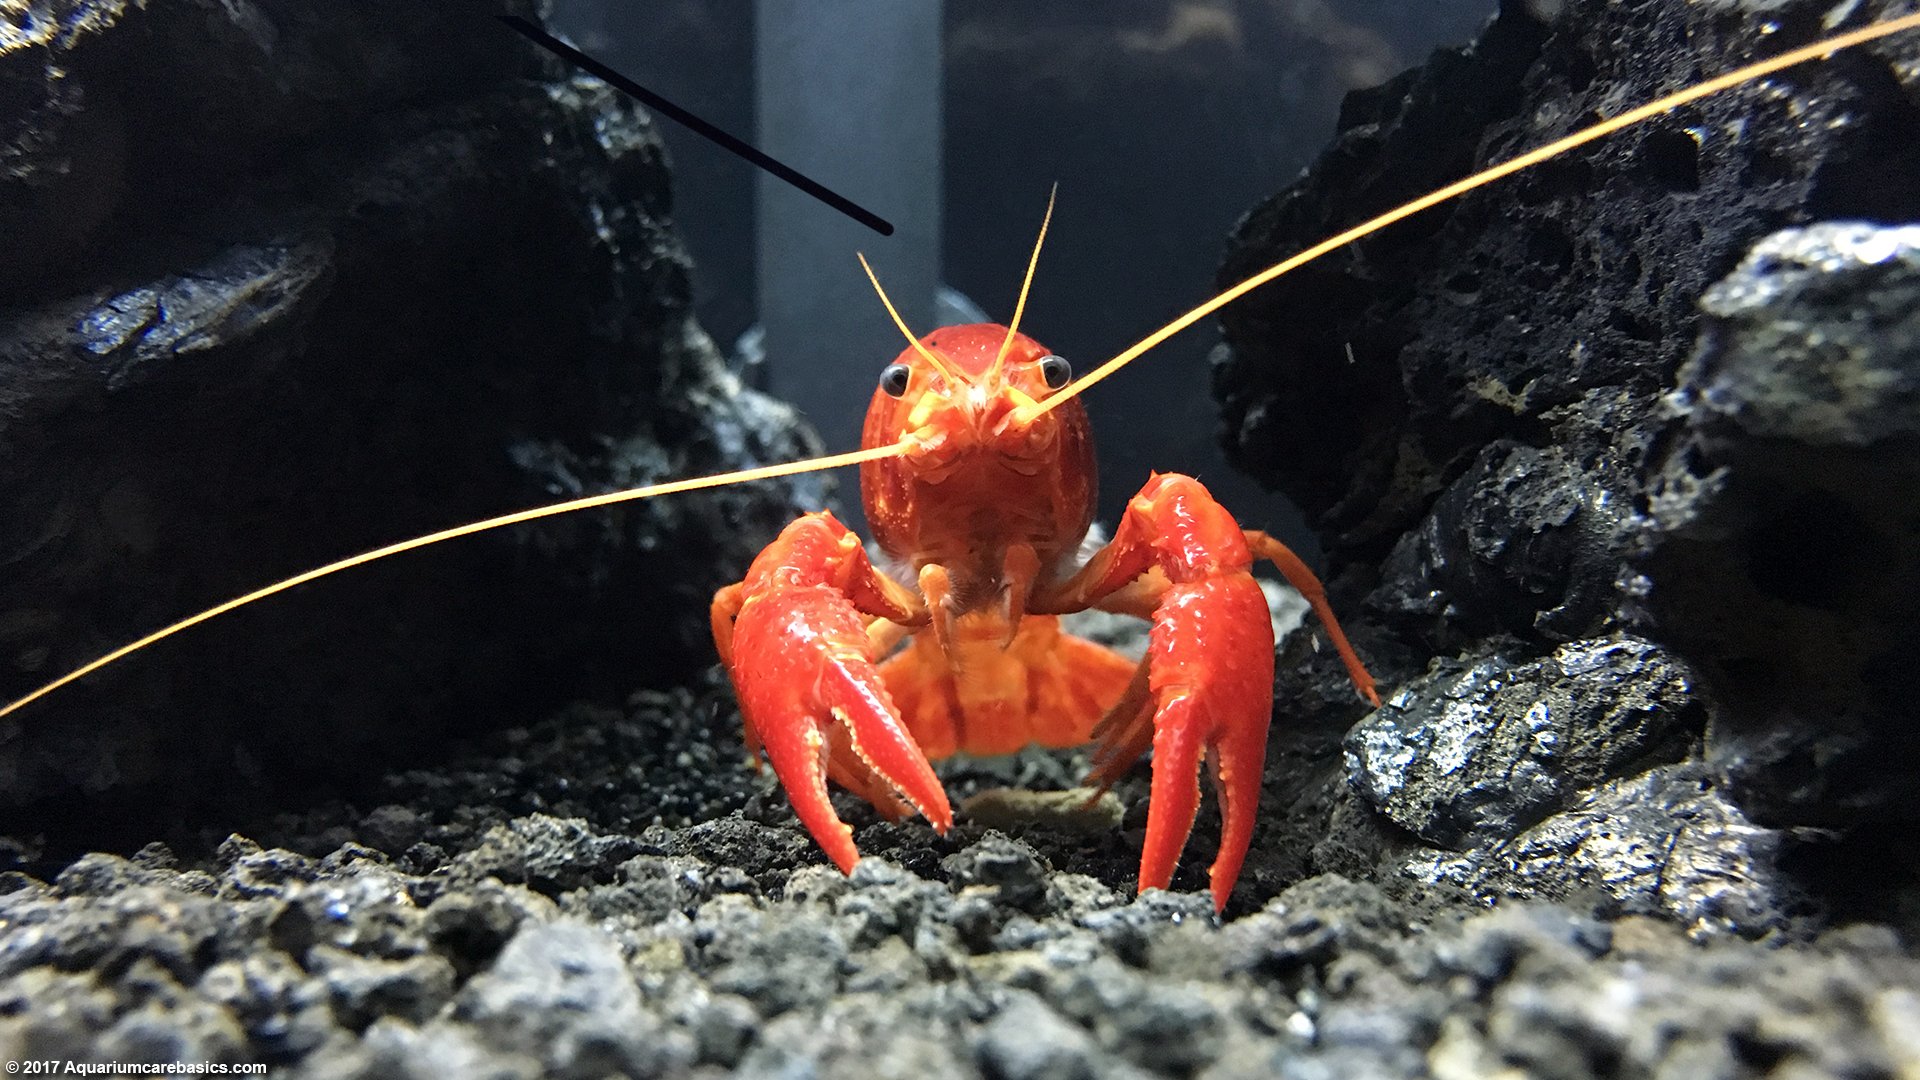 tangerine lobster compatibility